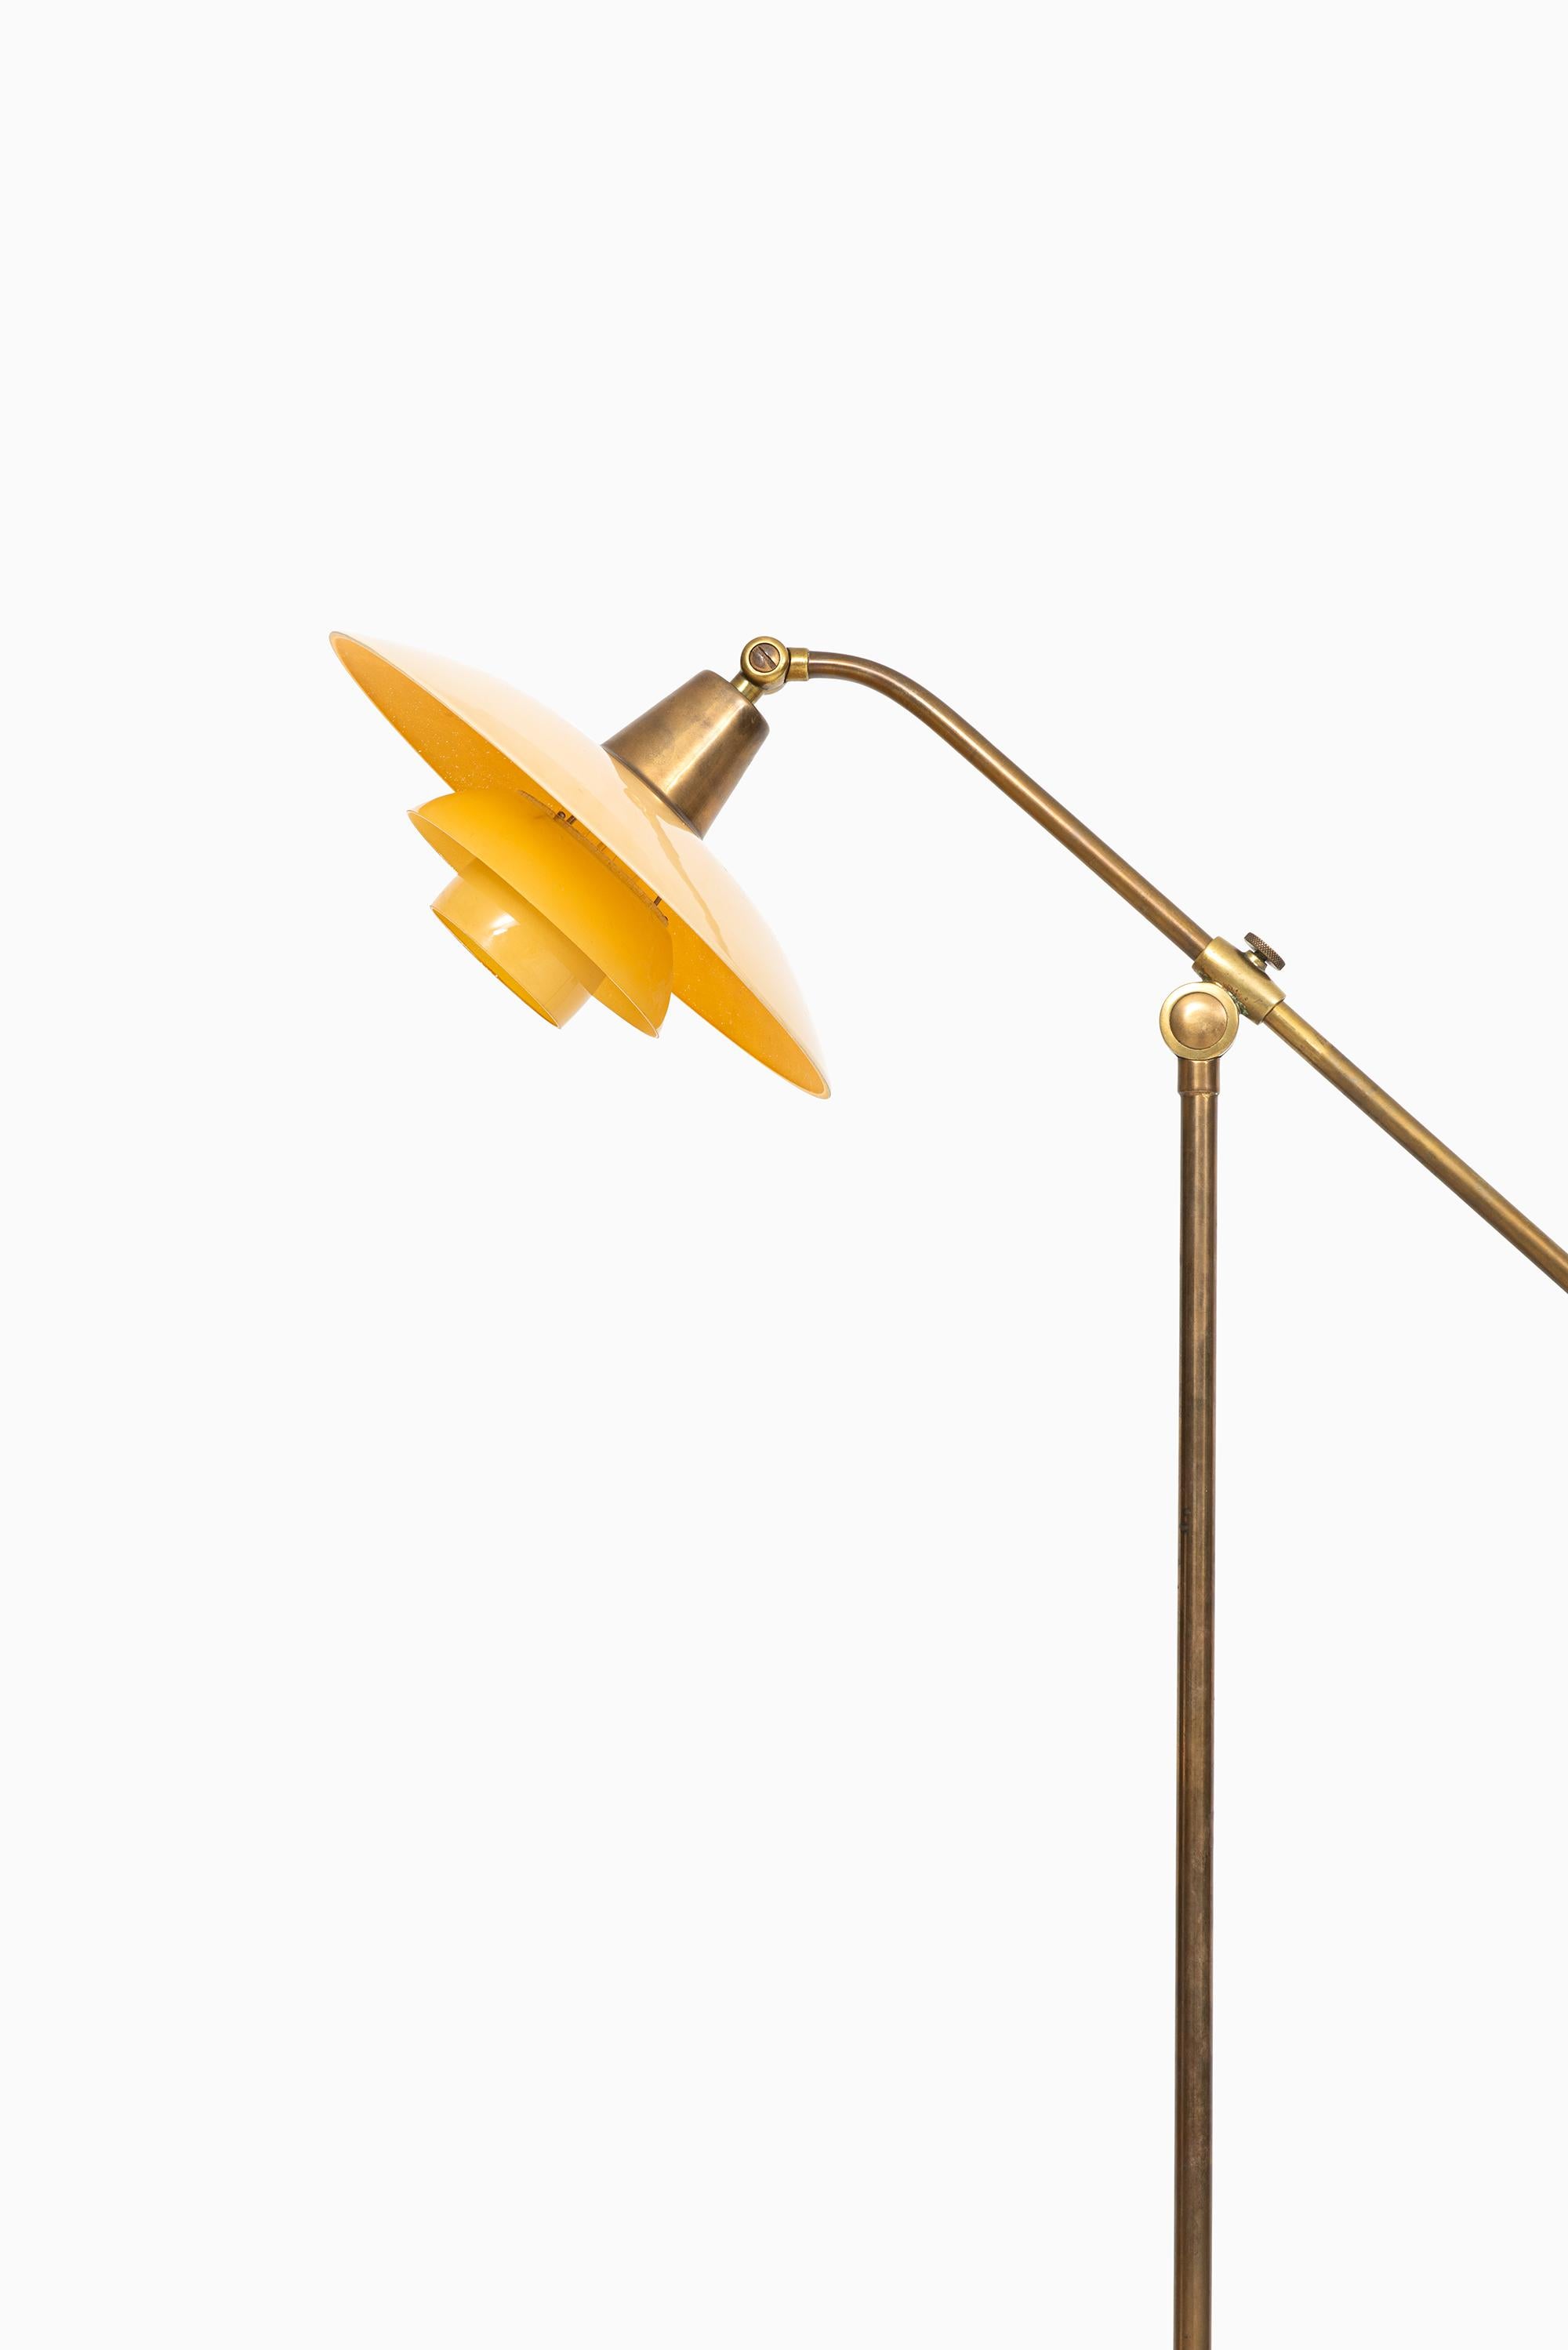 Very rare floor lamp model PH-2/2 ‘Water pump’ designed by Poul Henningsen. Produced by Louis Poulsen in Denmark.